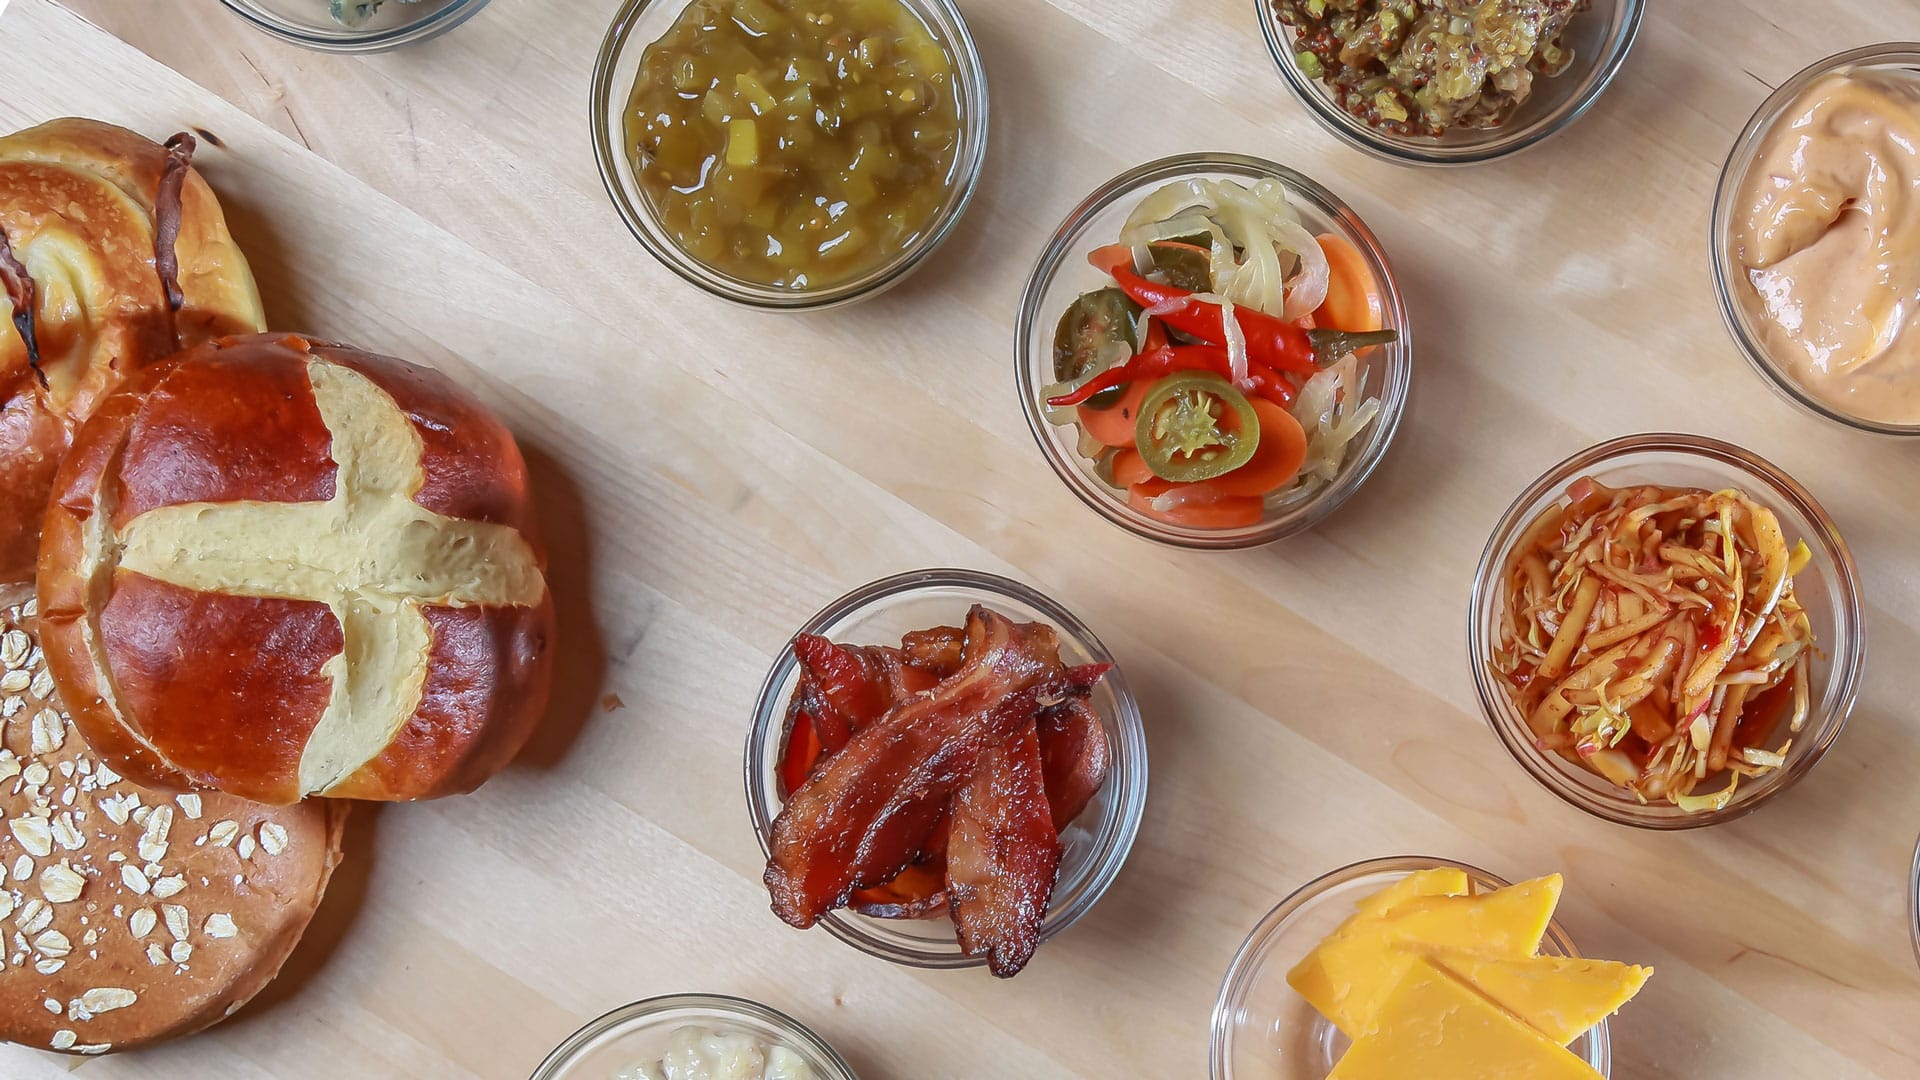 Buns and condiments arranged in bowls on a butcher block table surface